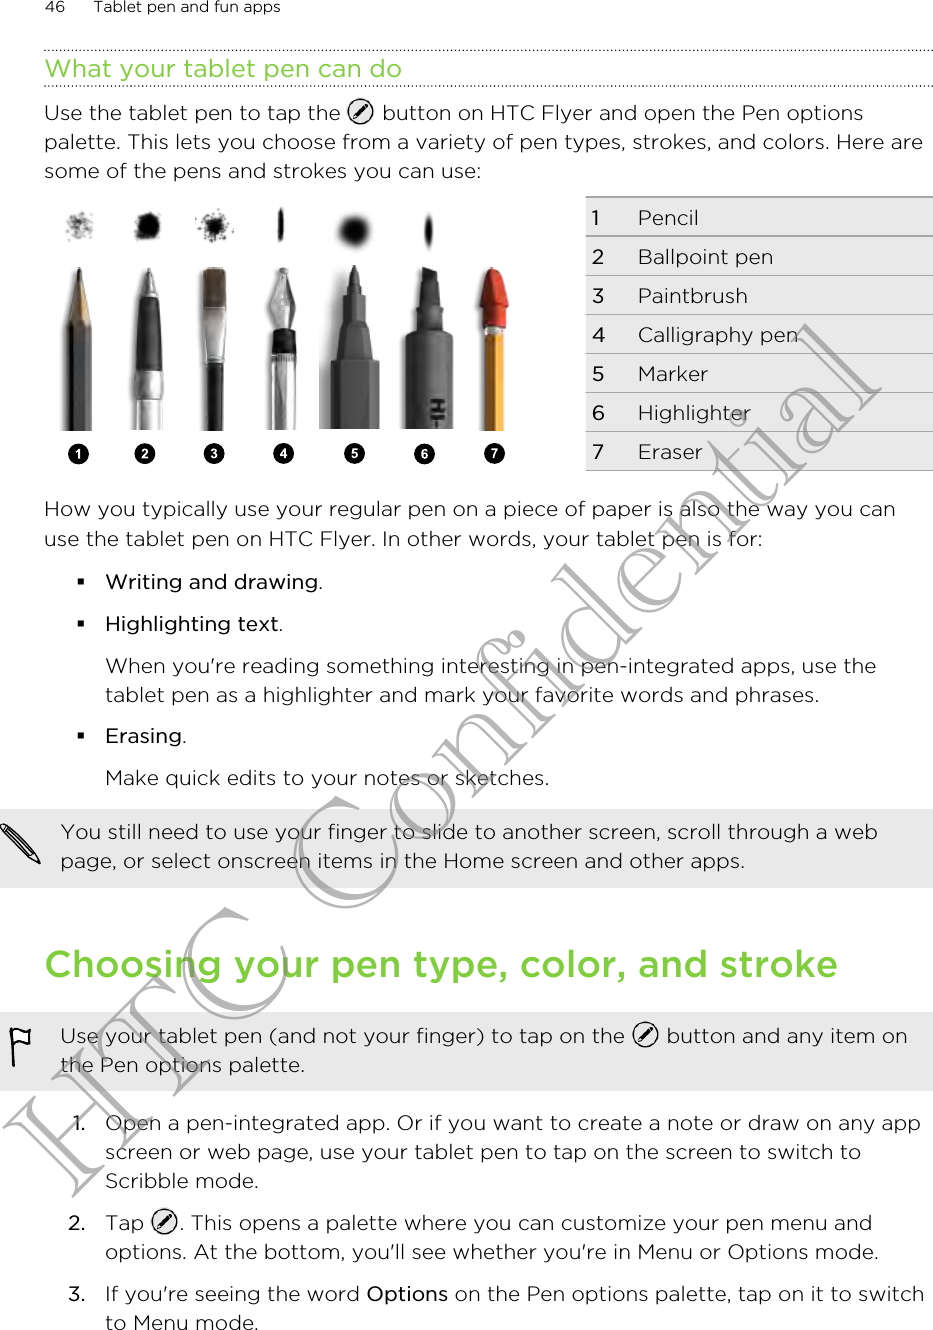 What your tablet pen can doUse the tablet pen to tap the   button on HTC Flyer and open the Pen optionspalette. This lets you choose from a variety of pen types, strokes, and colors. Here aresome of the pens and strokes you can use:1Pencil2Ballpoint pen3Paintbrush4Calligraphy pen5Marker6Highlighter7EraserHow you typically use your regular pen on a piece of paper is also the way you canuse the tablet pen on HTC Flyer. In other words, your tablet pen is for:§Writing and drawing.§Highlighting text.When you&apos;re reading something interesting in pen-integrated apps, use thetablet pen as a highlighter and mark your favorite words and phrases.§Erasing.Make quick edits to your notes or sketches.You still need to use your finger to slide to another screen, scroll through a webpage, or select onscreen items in the Home screen and other apps.Choosing your pen type, color, and strokeUse your tablet pen (and not your finger) to tap on the   button and any item onthe Pen options palette.1. Open a pen-integrated app. Or if you want to create a note or draw on any appscreen or web page, use your tablet pen to tap on the screen to switch toScribble mode.2. Tap  . This opens a palette where you can customize your pen menu andoptions. At the bottom, you&apos;ll see whether you&apos;re in Menu or Options mode.3. If you&apos;re seeing the word Options on the Pen options palette, tap on it to switchto Menu mode.46 Tablet pen and fun appsHTC Confidential